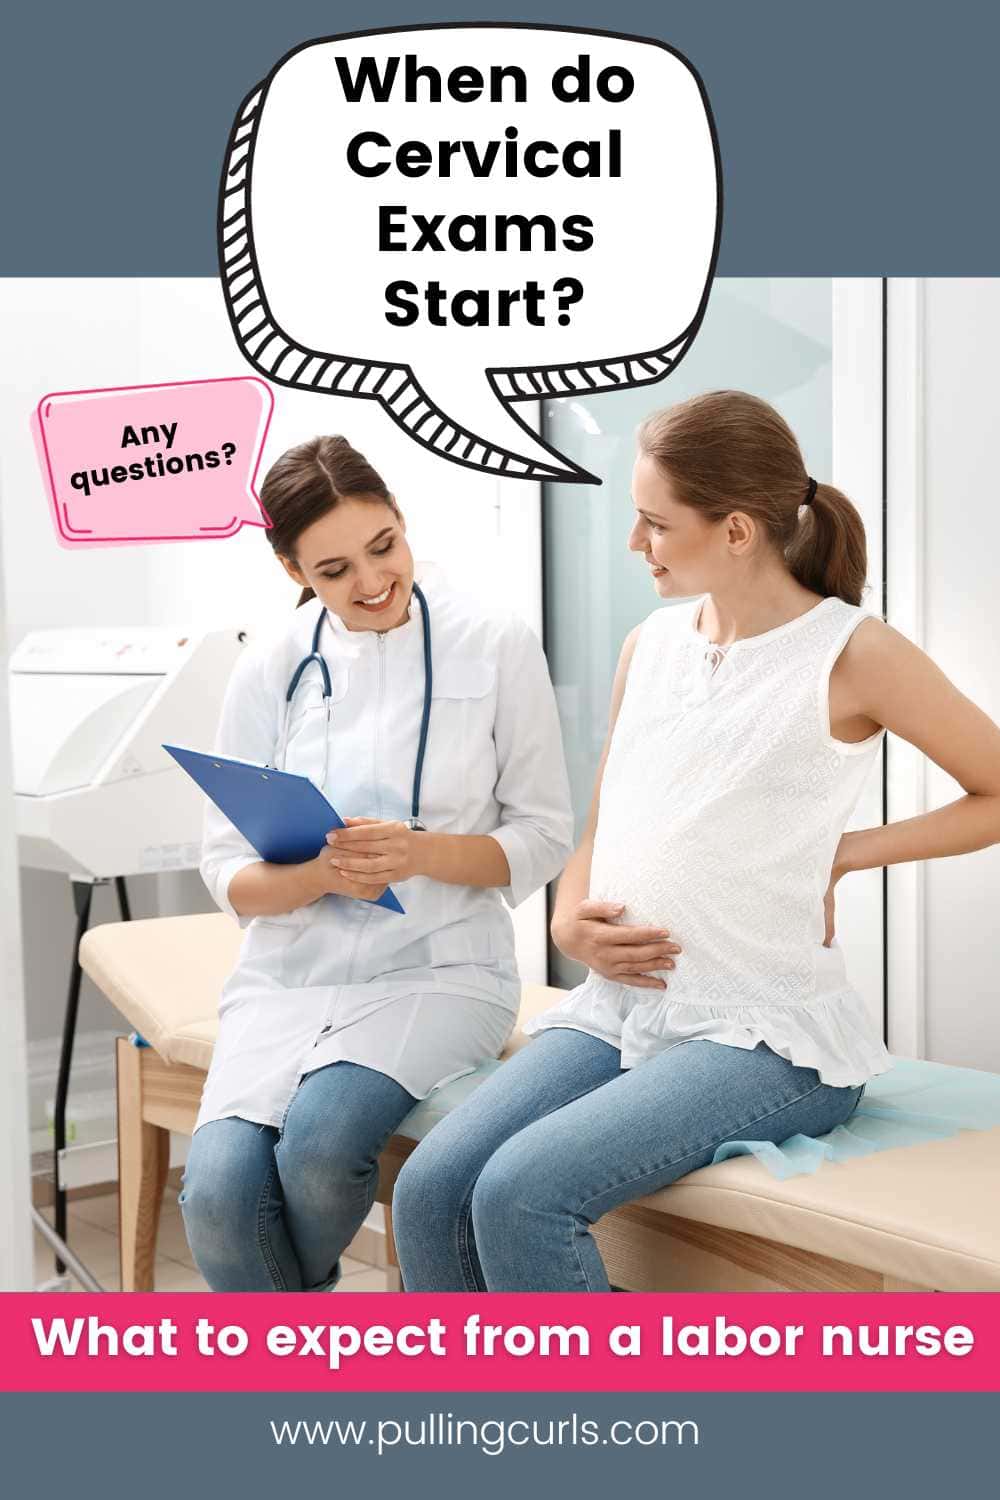 Dive into a comprehensive guide on the start of cervical checks. Helping women navigate their health journey, this pin provides a detailed timeline that elucidates when and why cervical screenings become a part of regular health checkups. Be empowered, informed, and in control of your health. via @pullingcurls